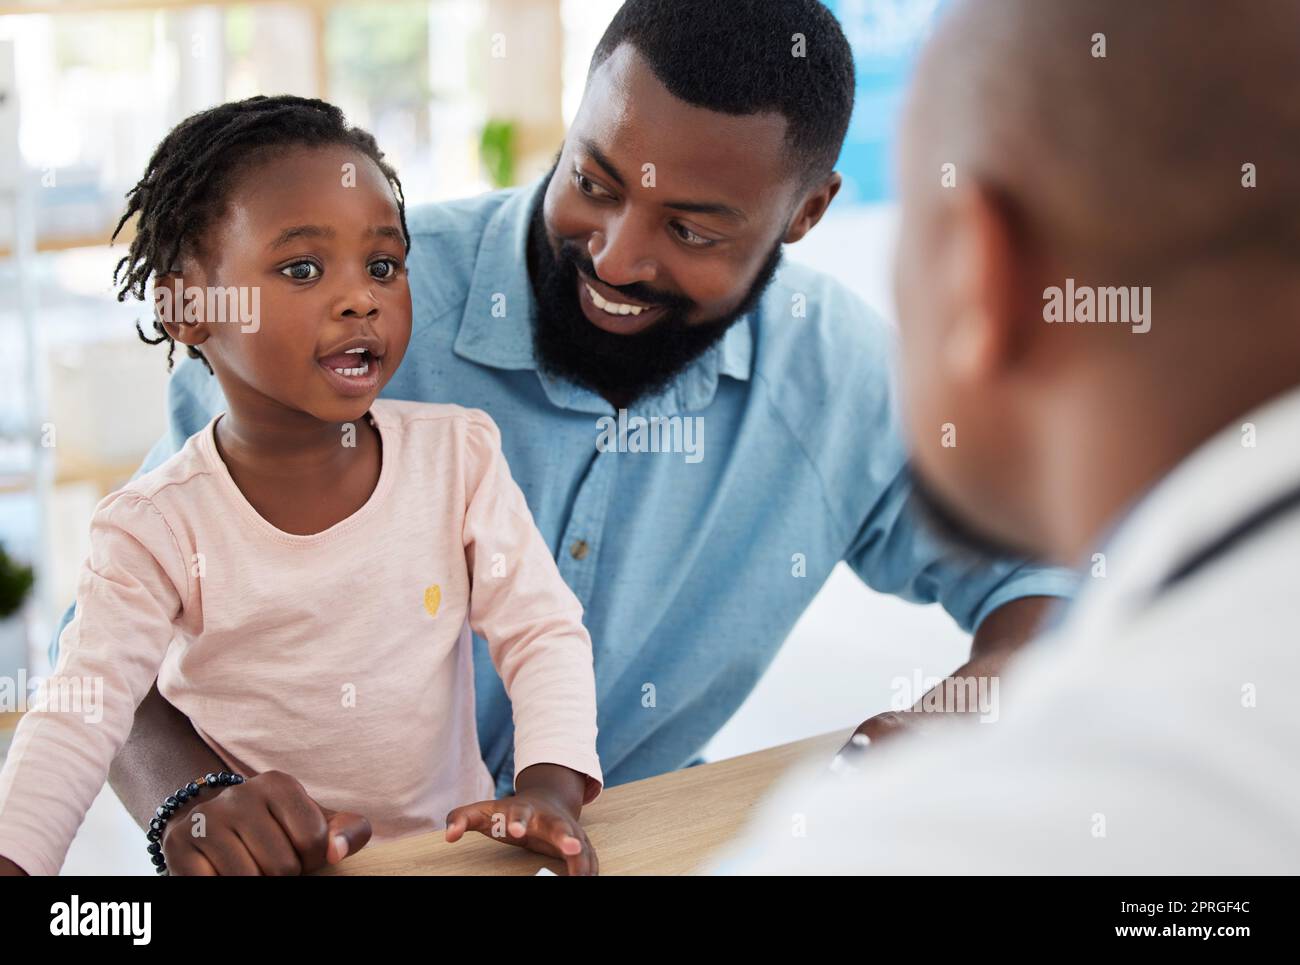 Kids doctor, black family and consulting hospital worker in medical, insurance or healthcare help. Girl, happy father and pediatric employee in conversation or communication in children wellness room Stock Photo